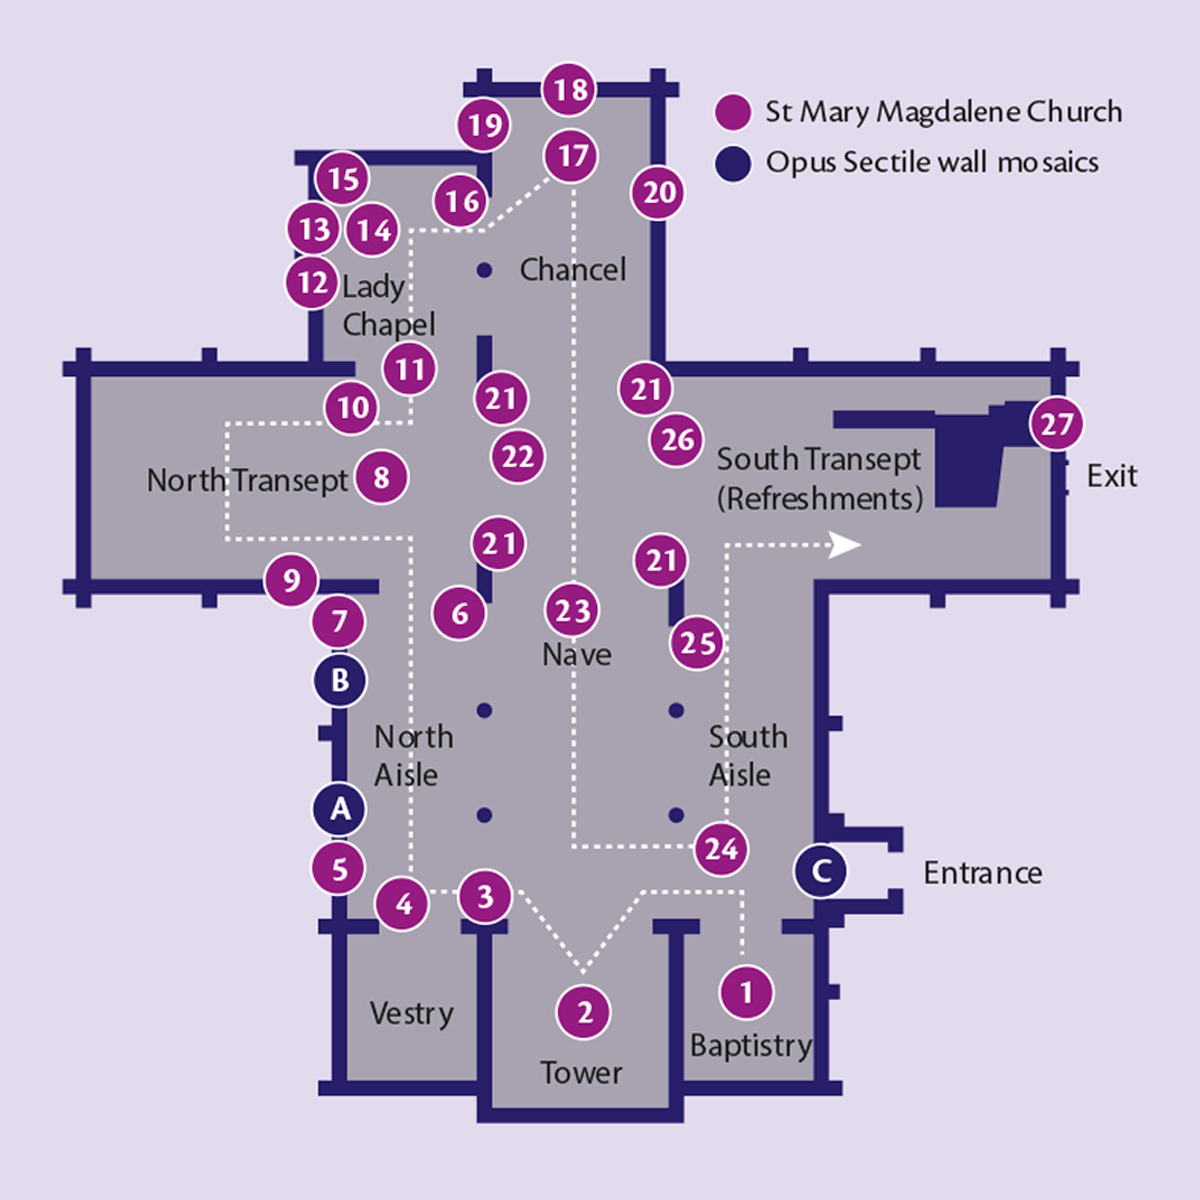 Church map from the St Mary Magdalene church tour guide leaflet